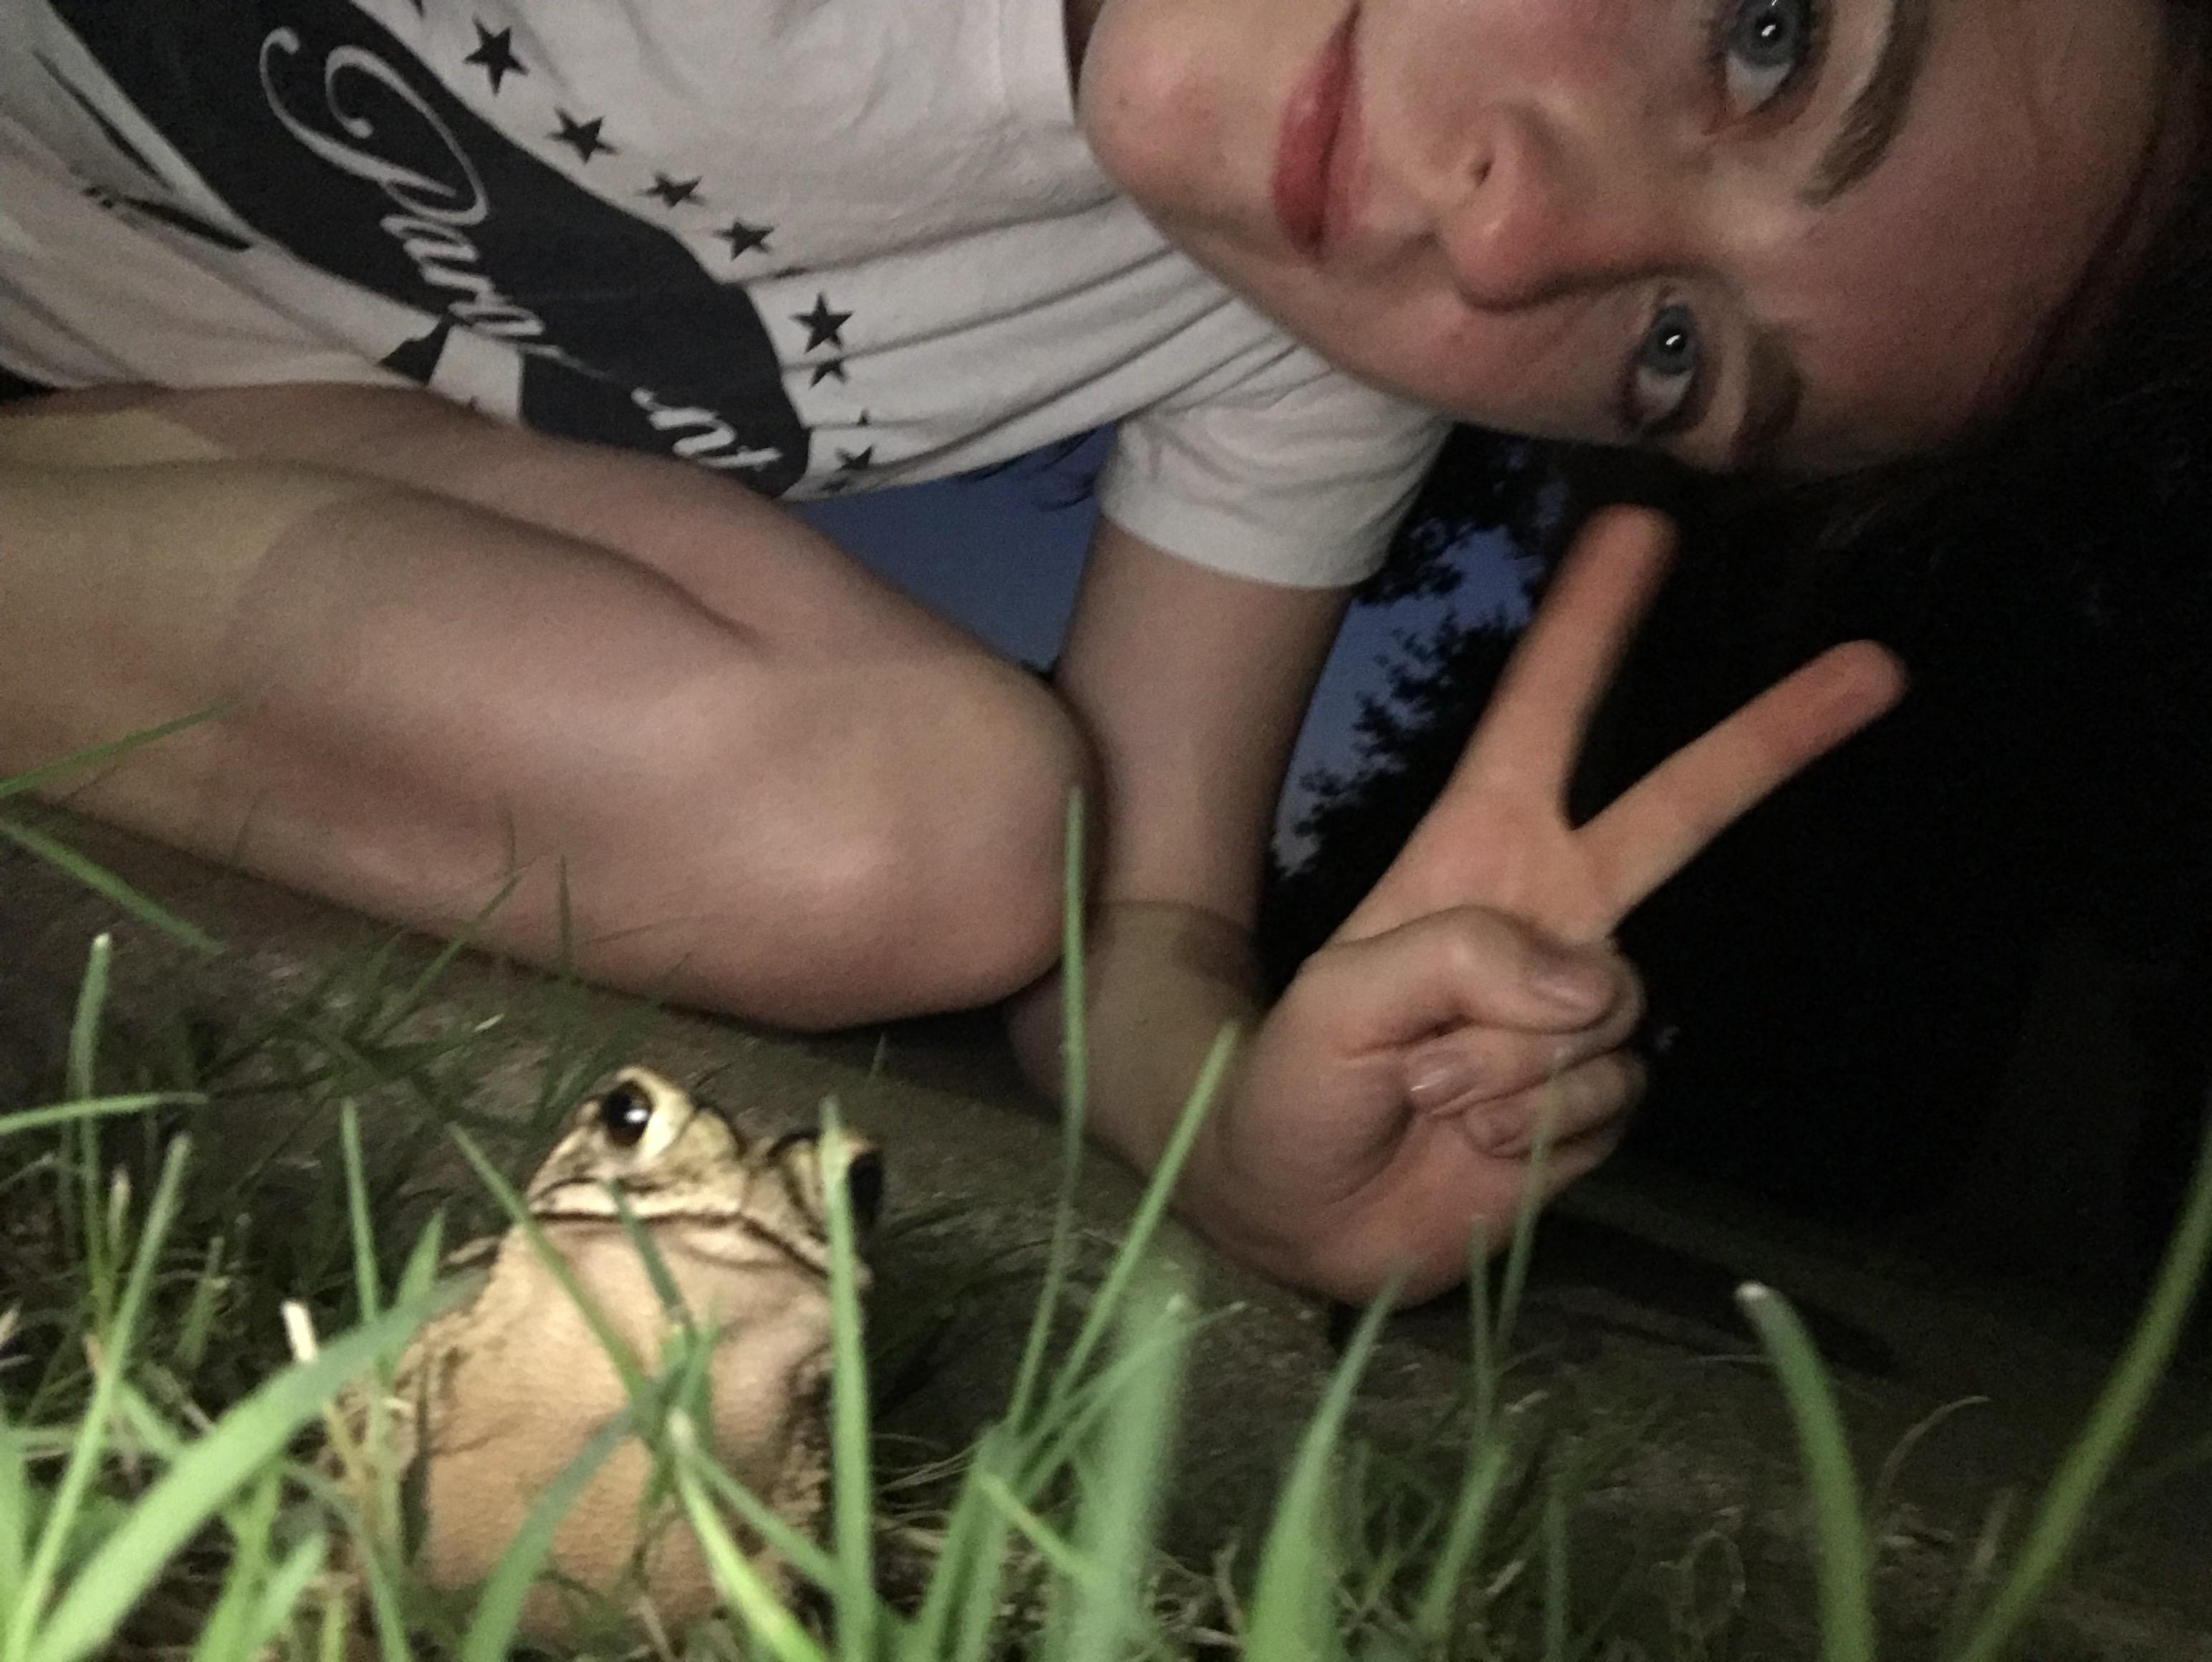 Hi, I take selfies with frogs